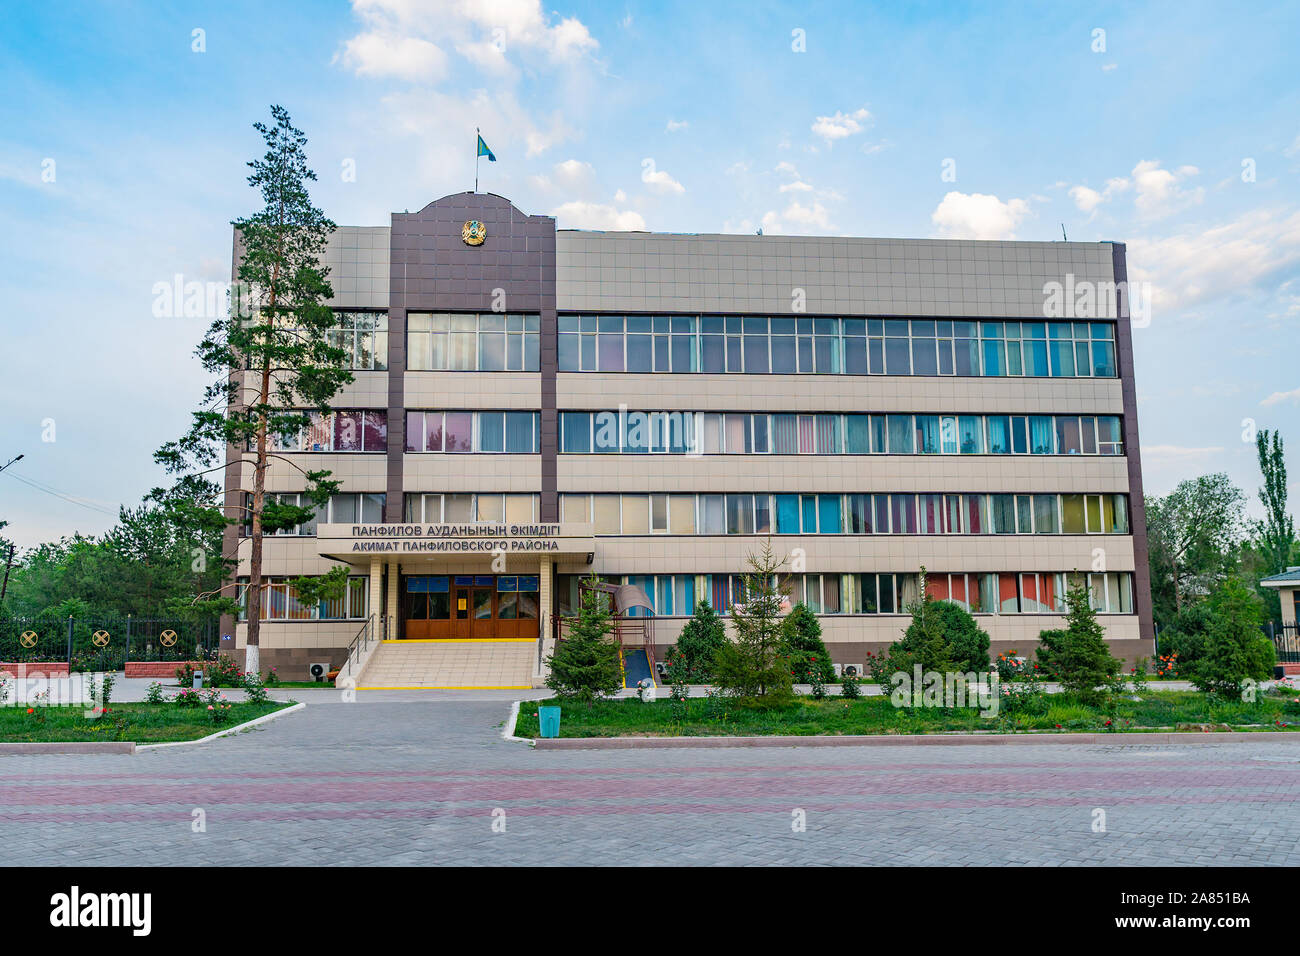 Zharkent Akimat Panfilov Rayon City Hall Building Picturesque Breathtaking View on a Sunset Blue Sky Day Stock Photo